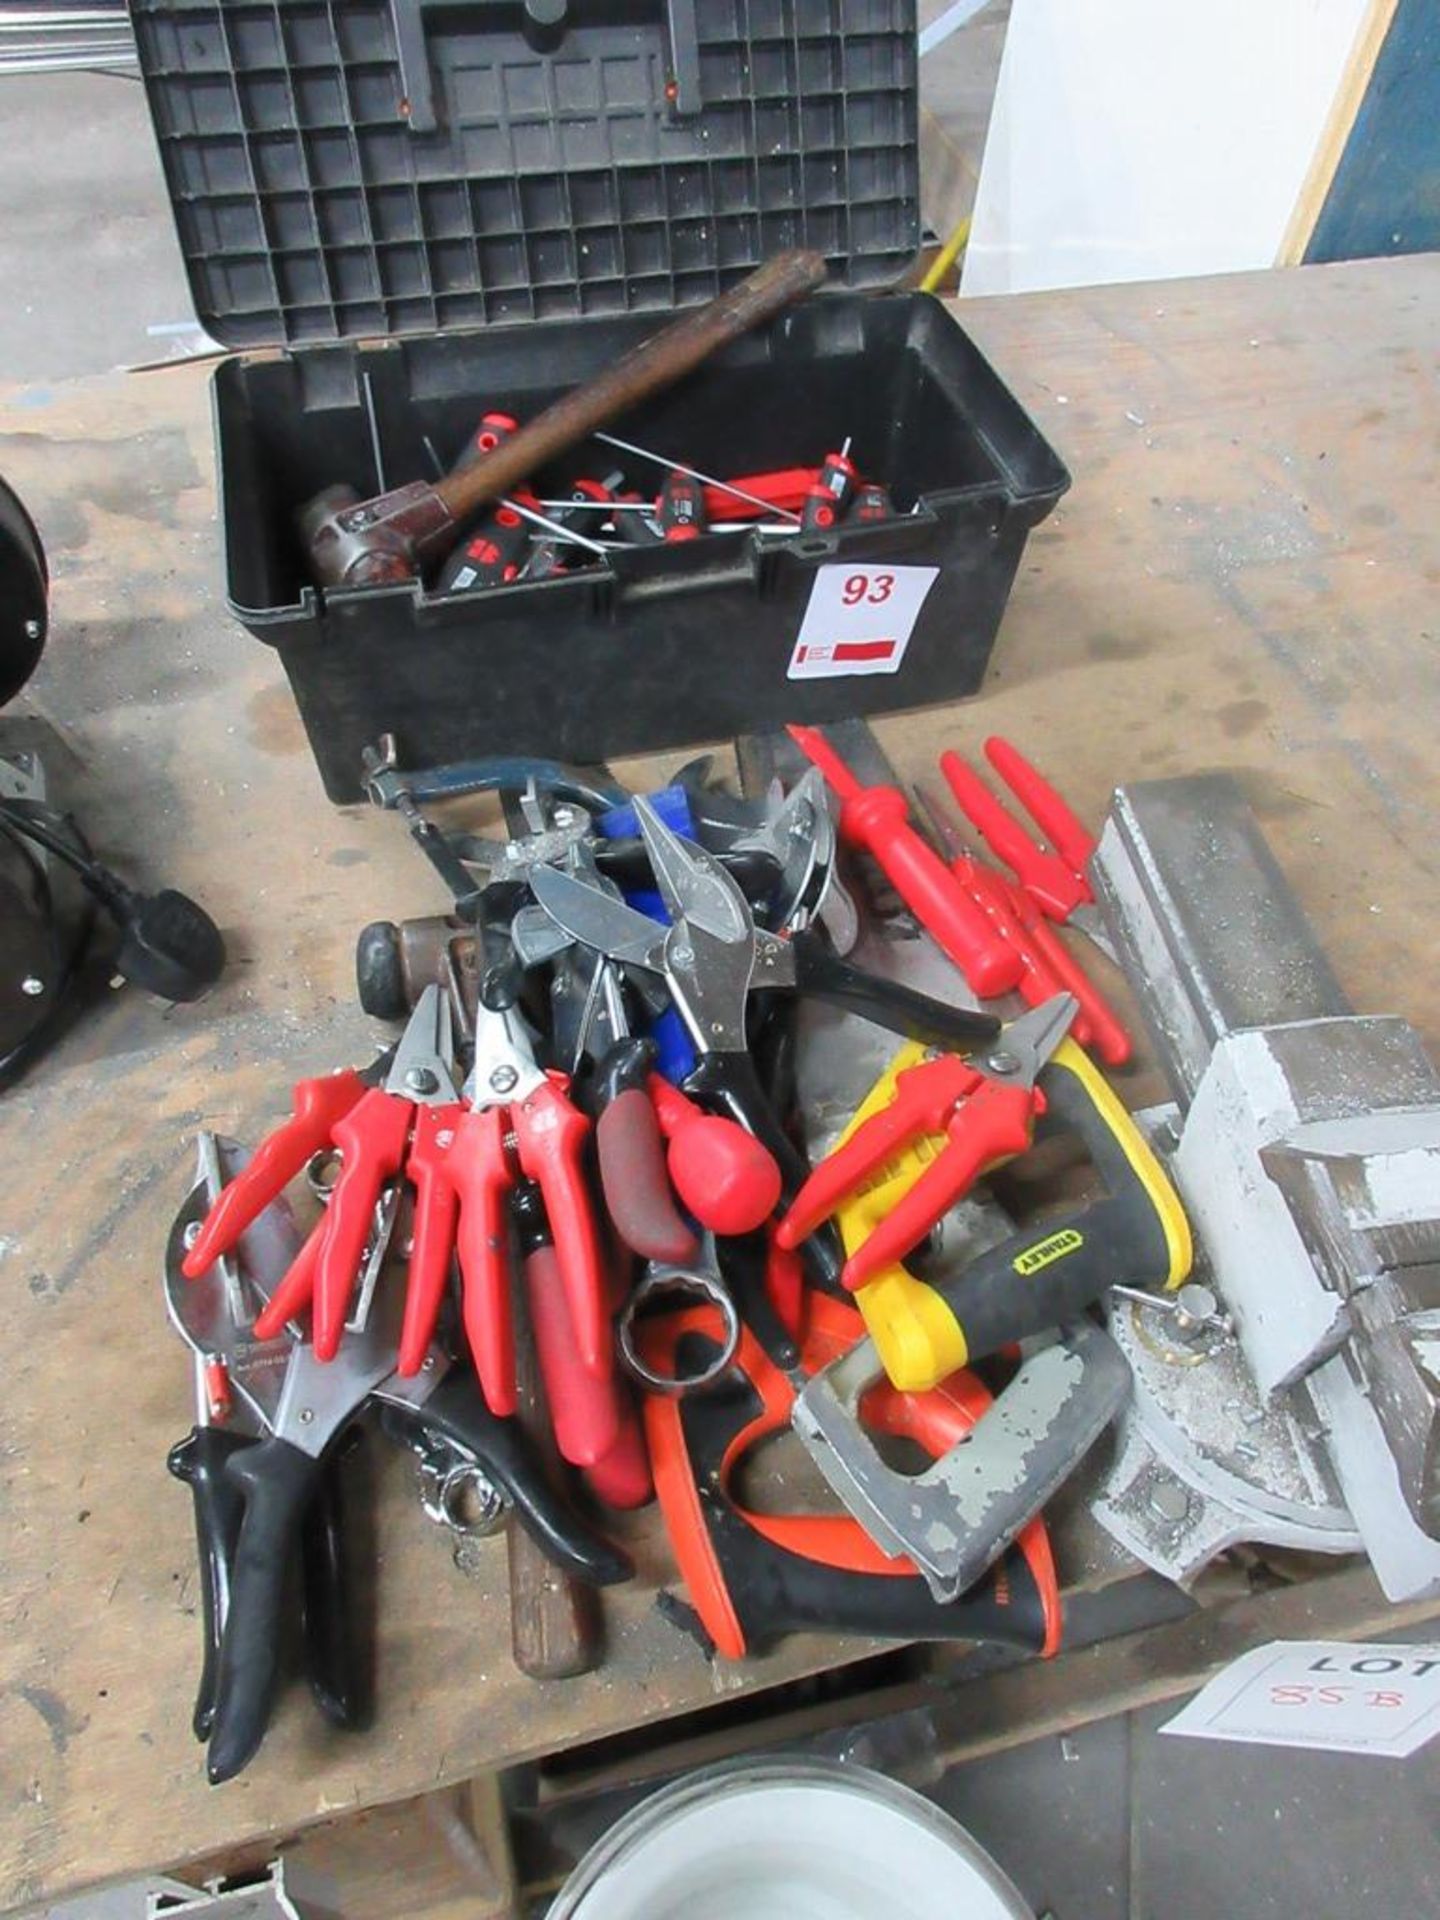 Assorted hand tools including cutters, saws, screw drivers, T keys etc.